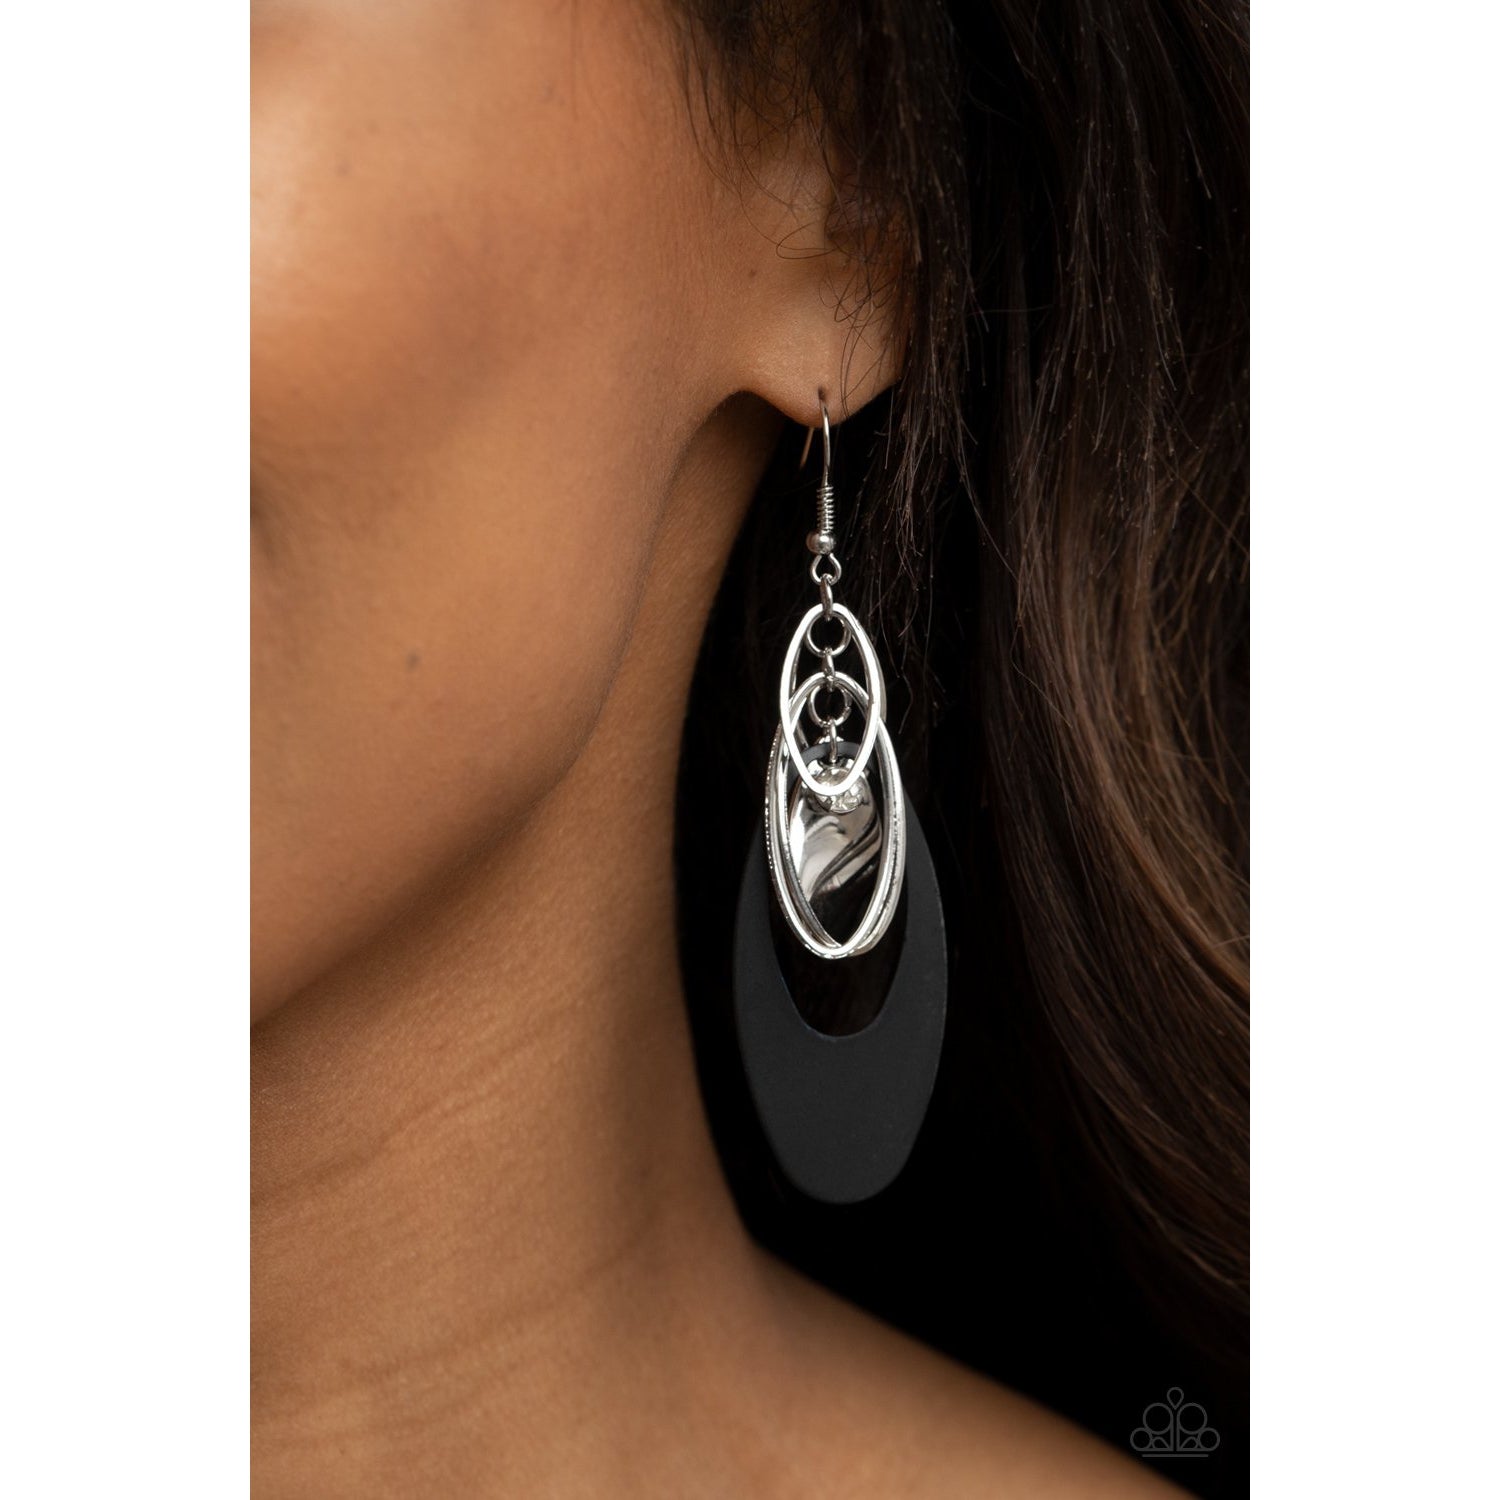 Ambitious Allure - Black and Silver Earrings - Paparazzi Accessories - GlaMarous Titi Jewels